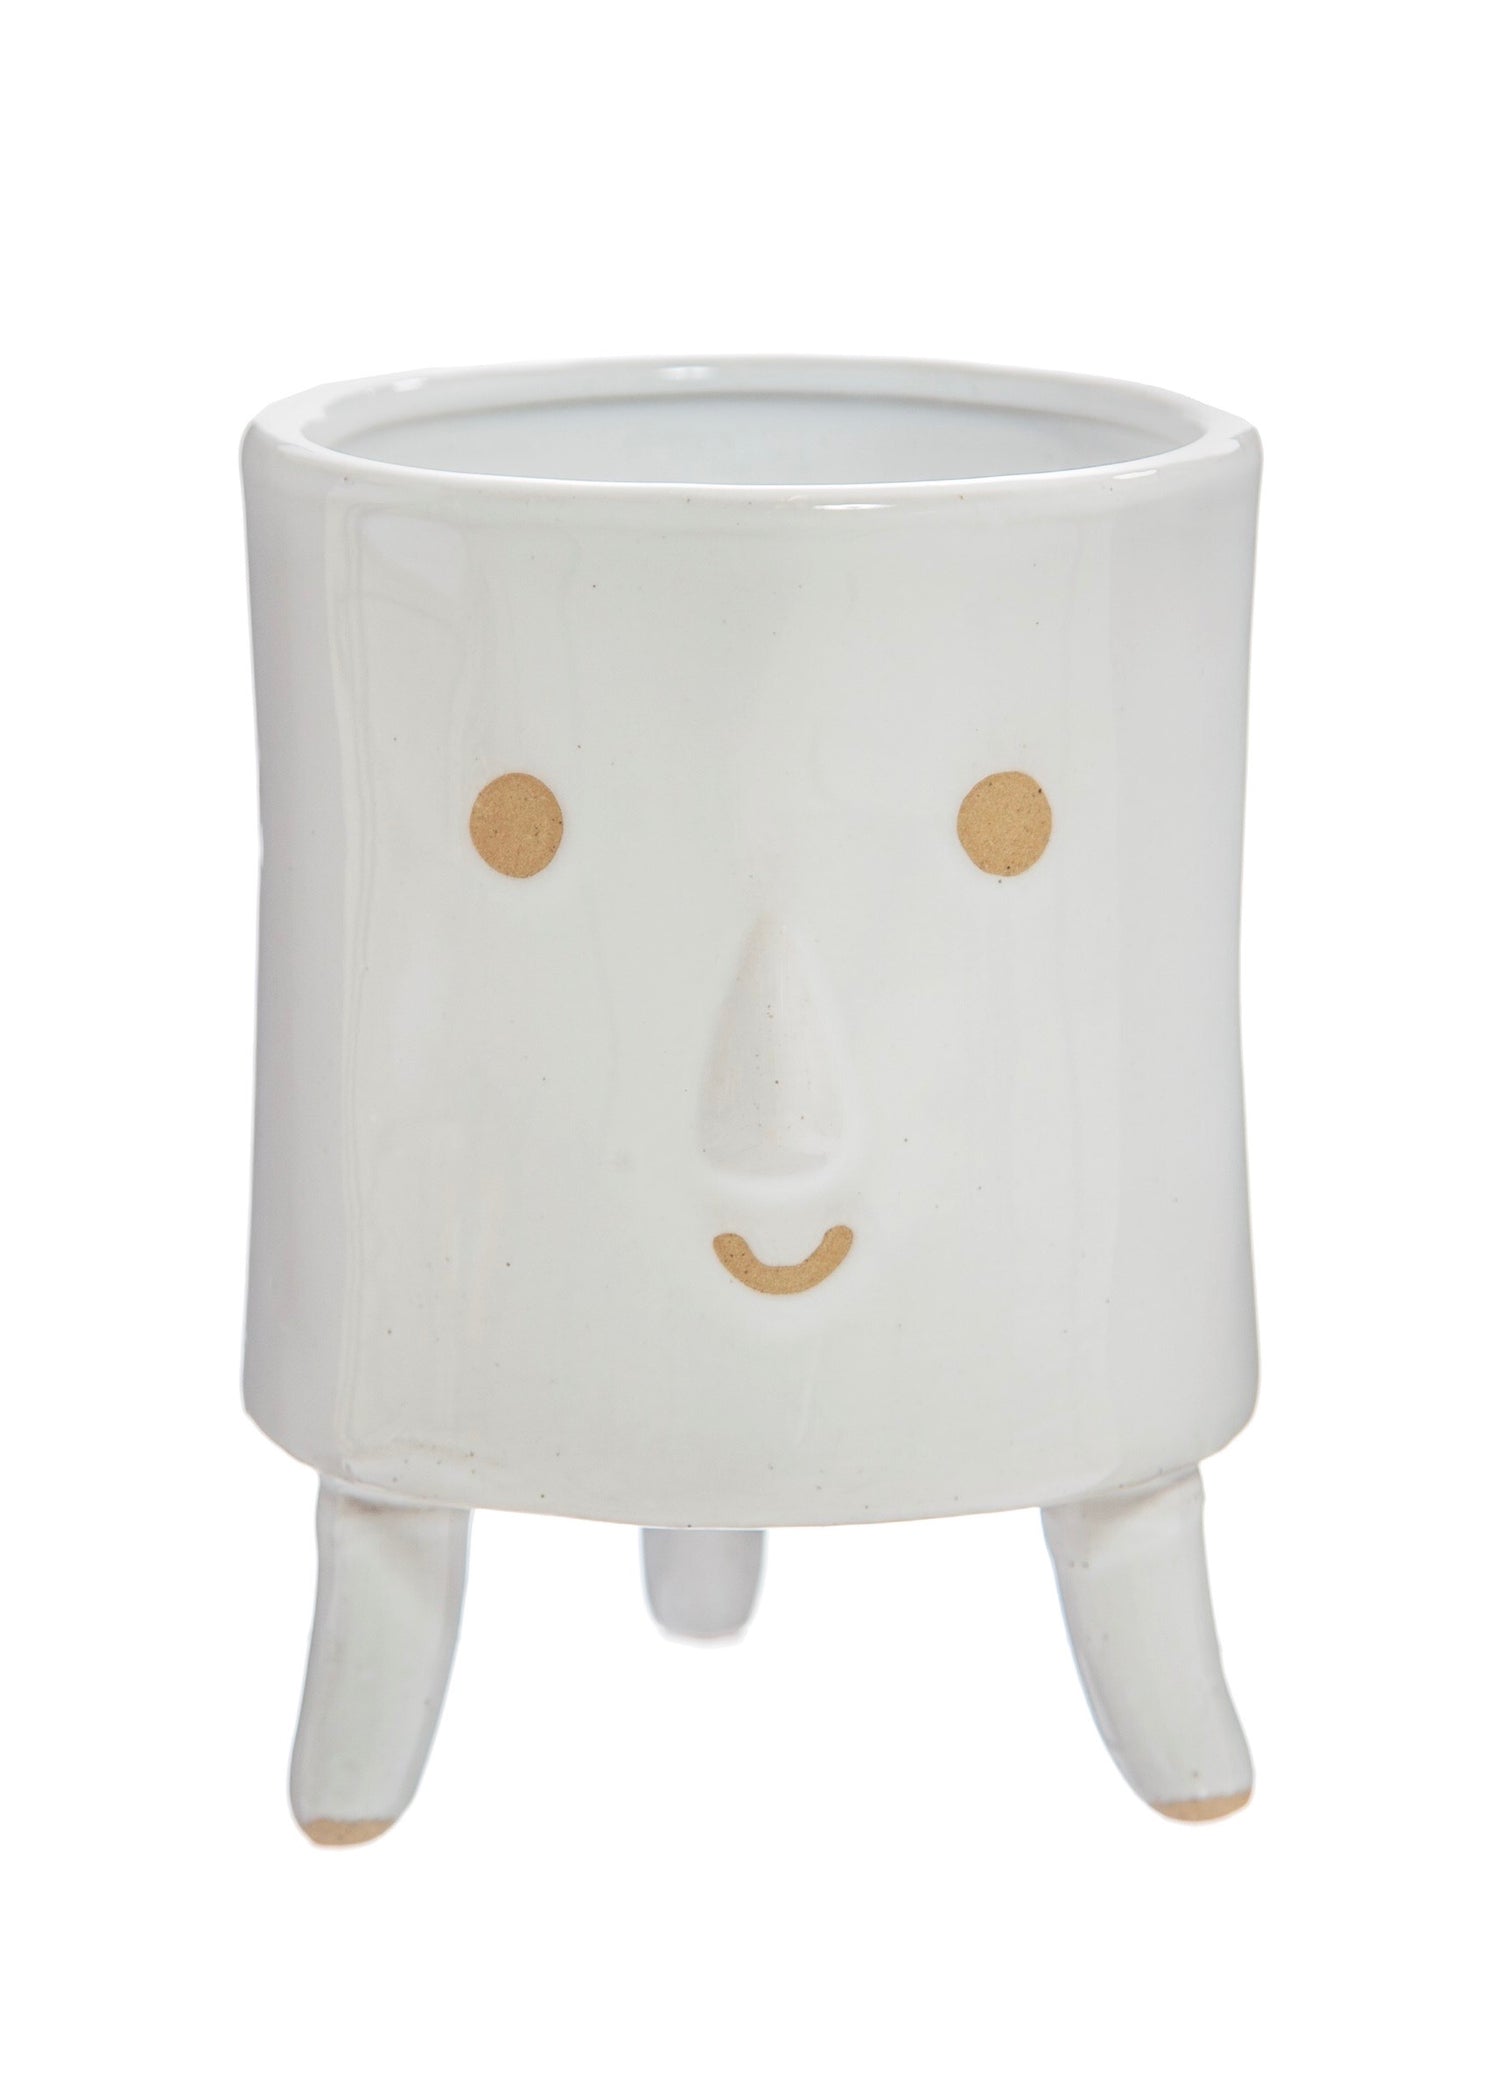 White glazed leggy planter with brown smiley face